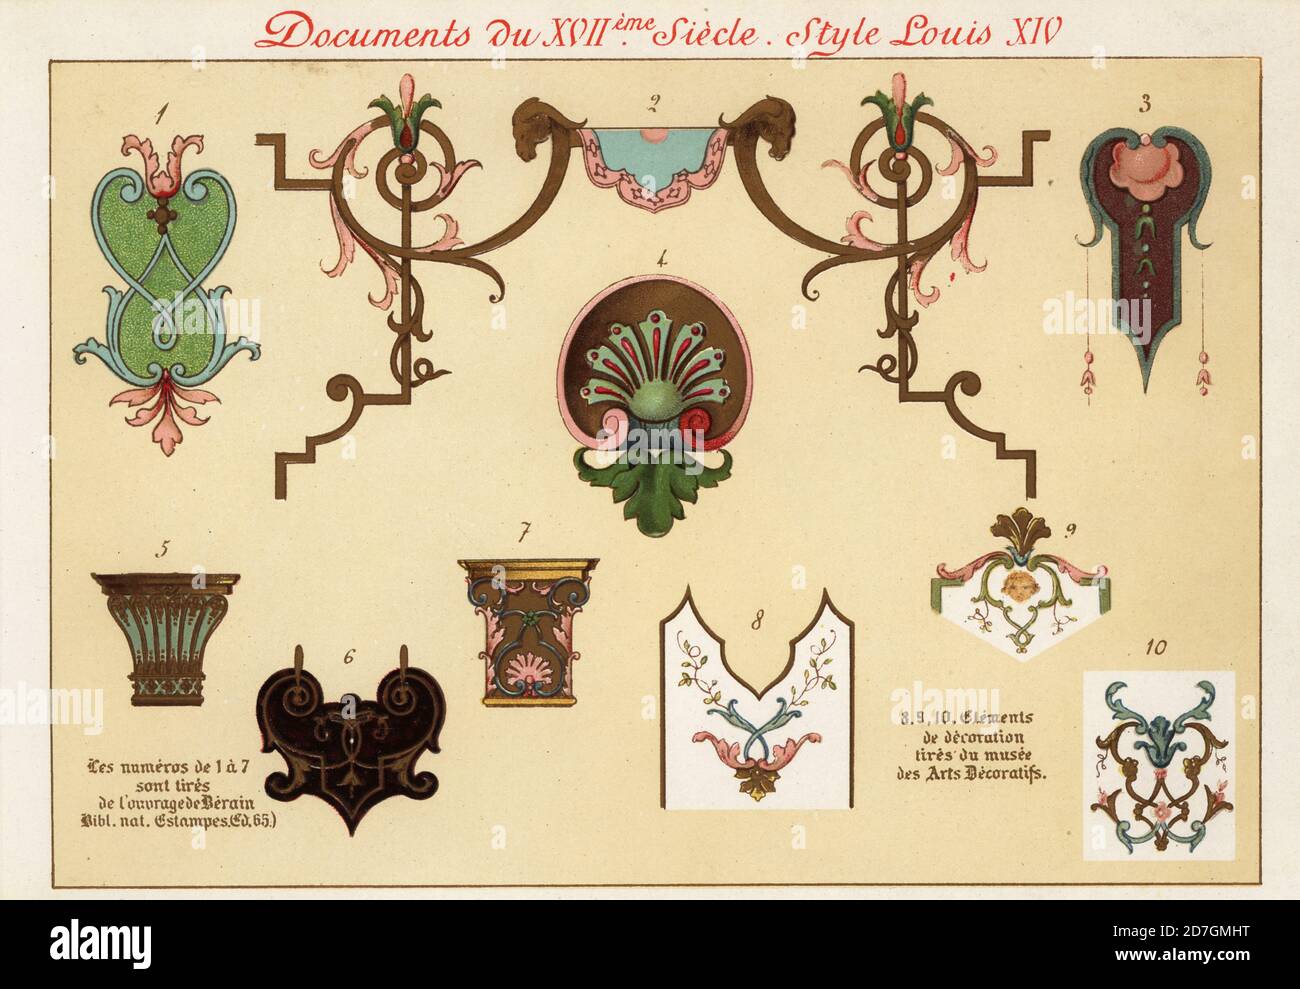 Design elements from the rococo era of King Louis XIV, the Sun King, 17th century. 1-7 after Jean Berain, 8-10 from the Museum of Decorative Arts. Chromolithograph designed and lithographed by Ernst Guillot from Elements d'Ornementation du XVIIme et XVIIIe Siecle, Elements of Ornament of the 17th and 18th century, Renouard, Paris, 1890. Stock Photo